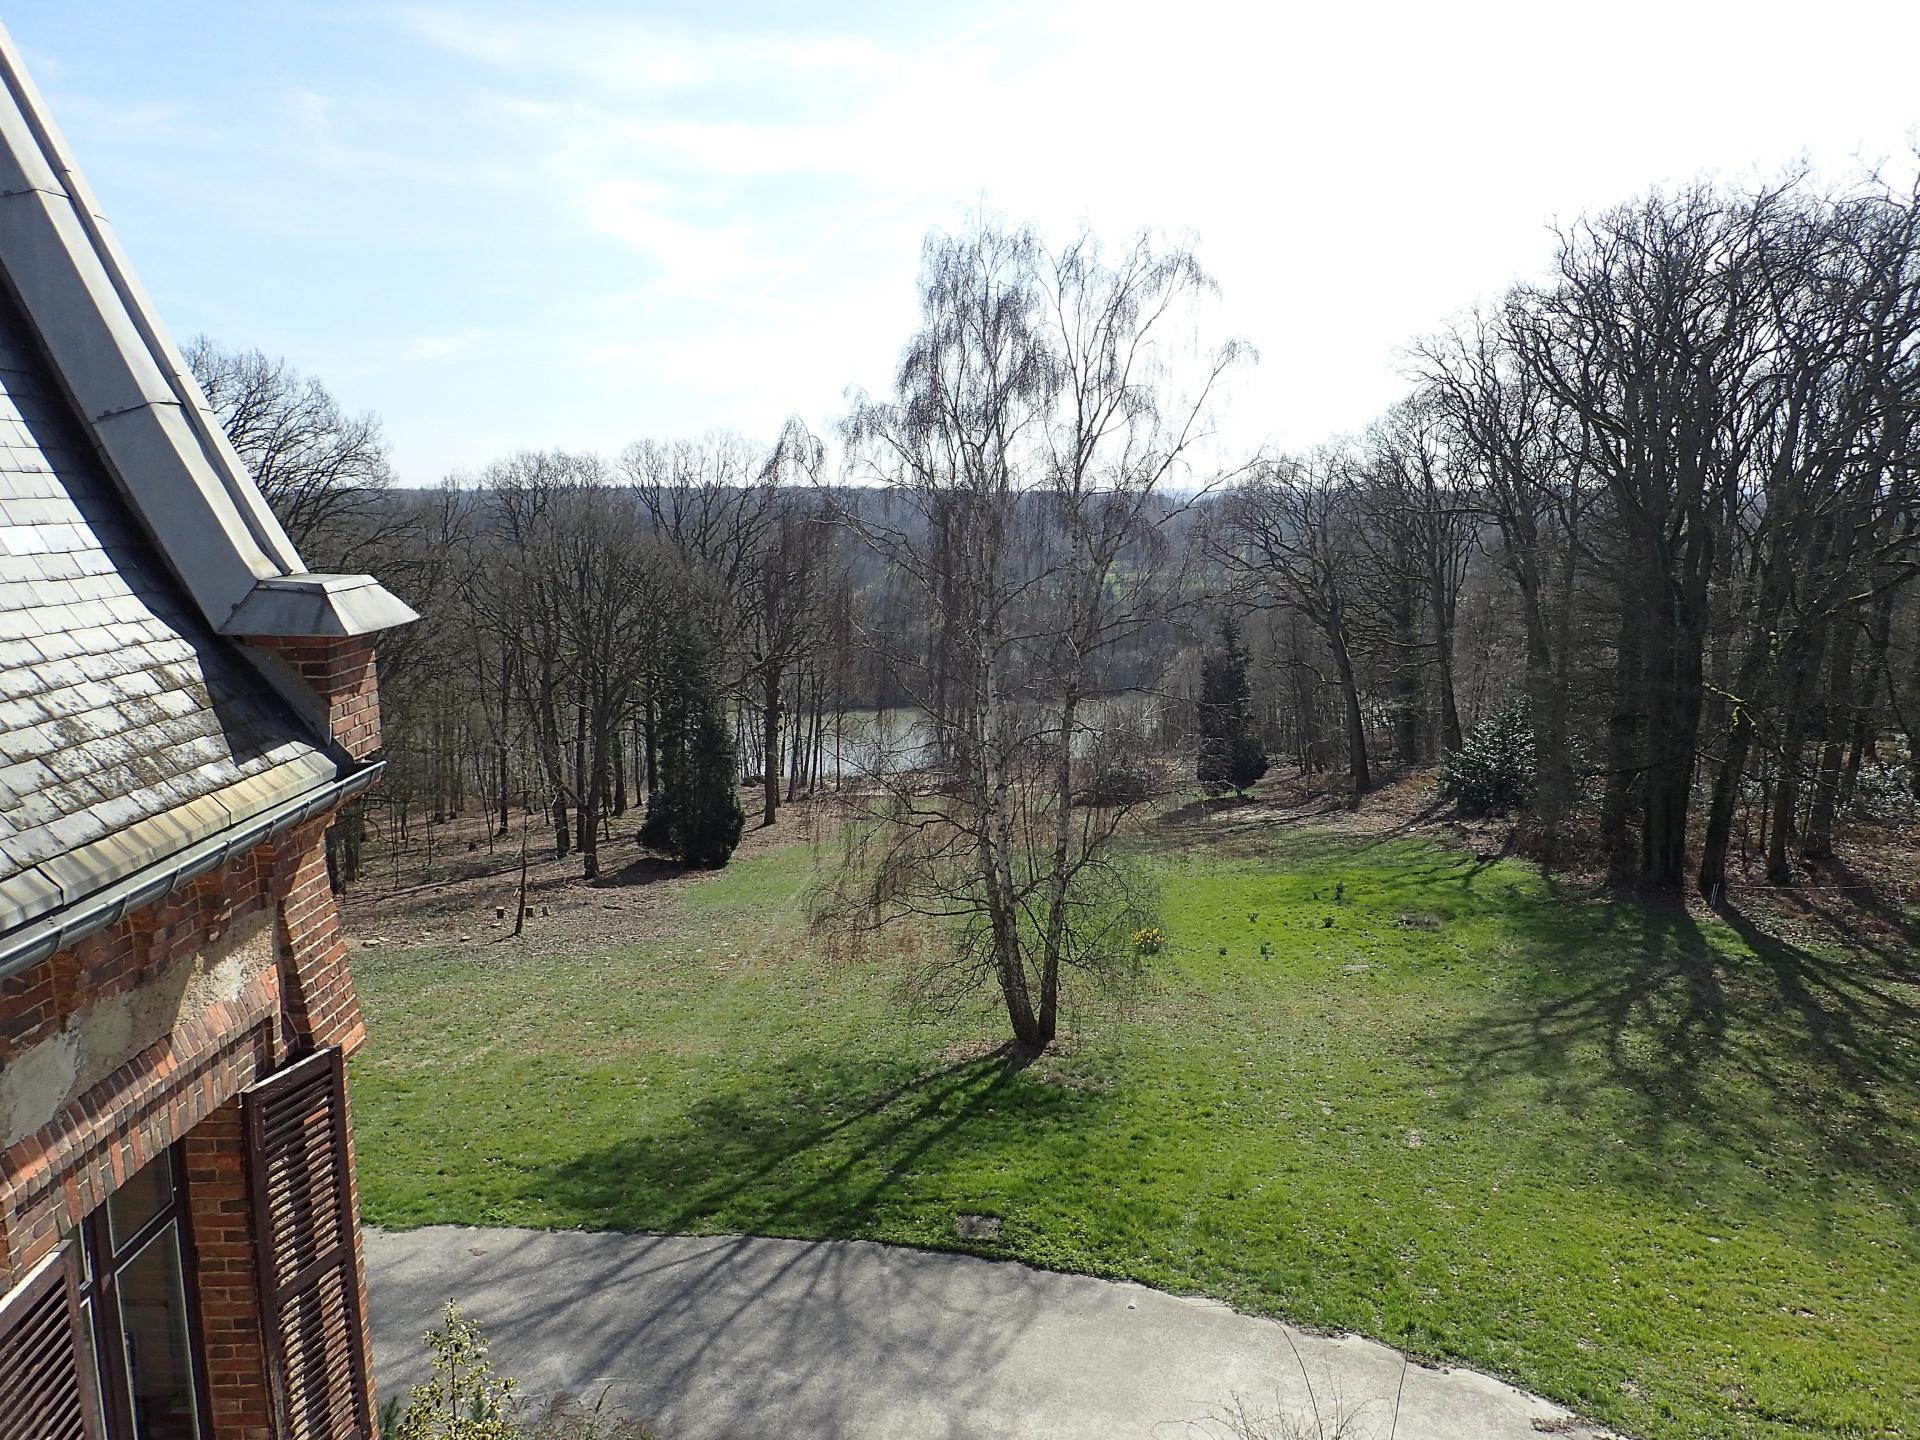 Property manor woods park with view of the Seine